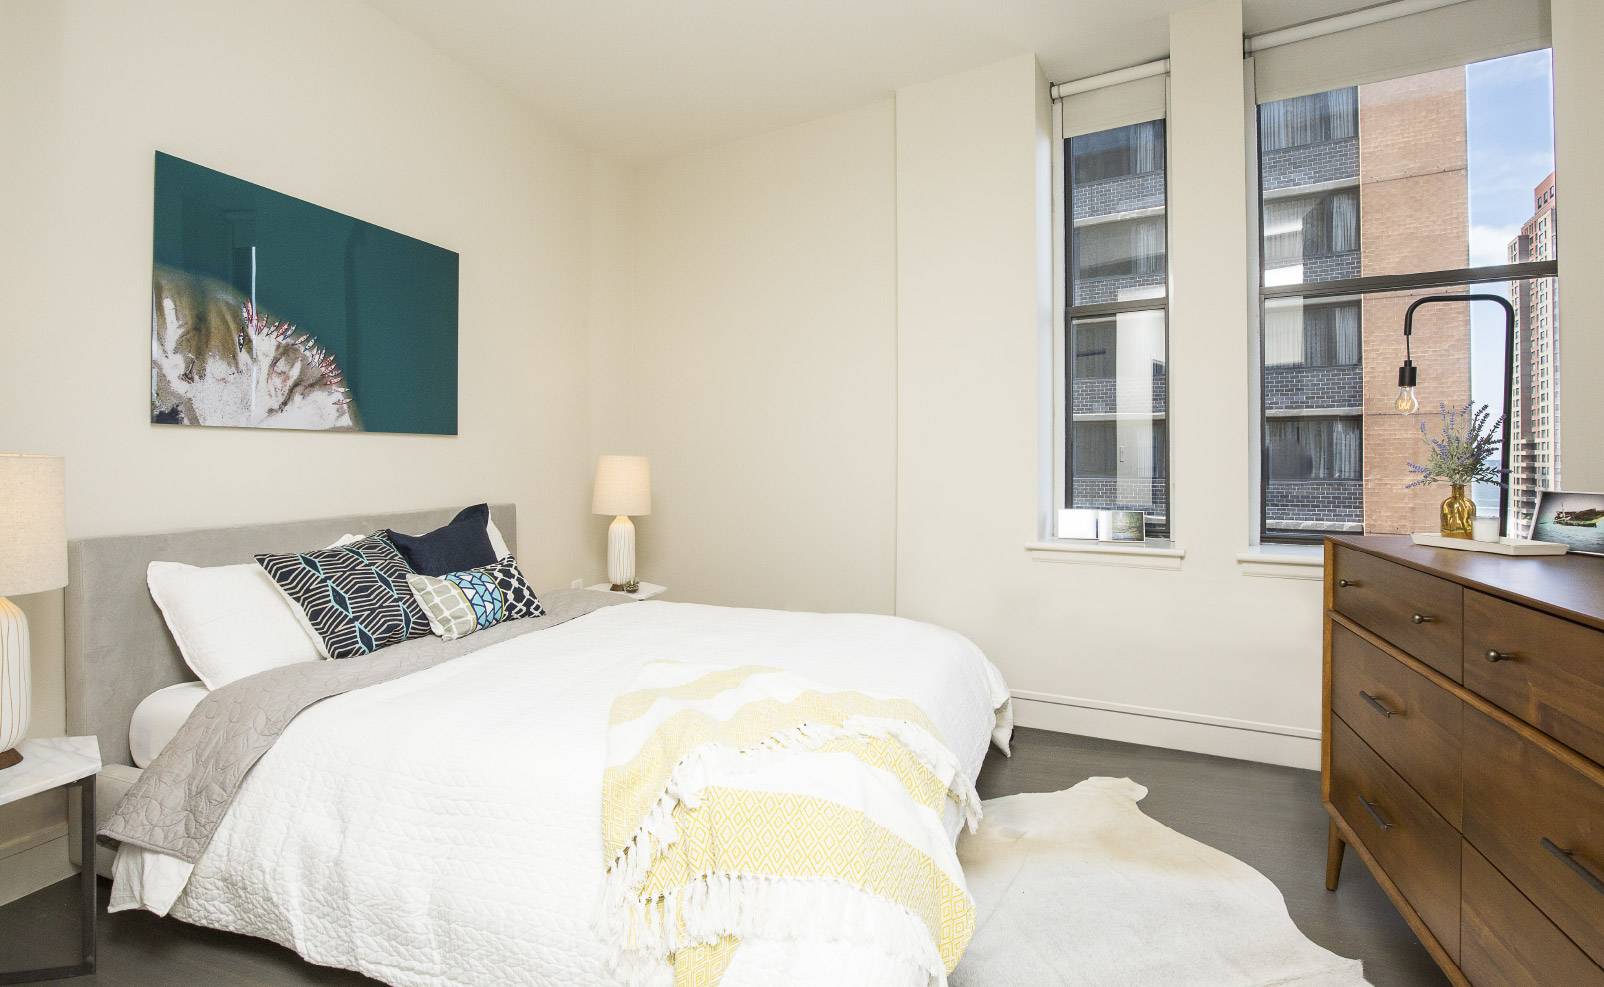 No Fee! Charming FiDi Studio with Terrace in High-end Building with Fitness Facility